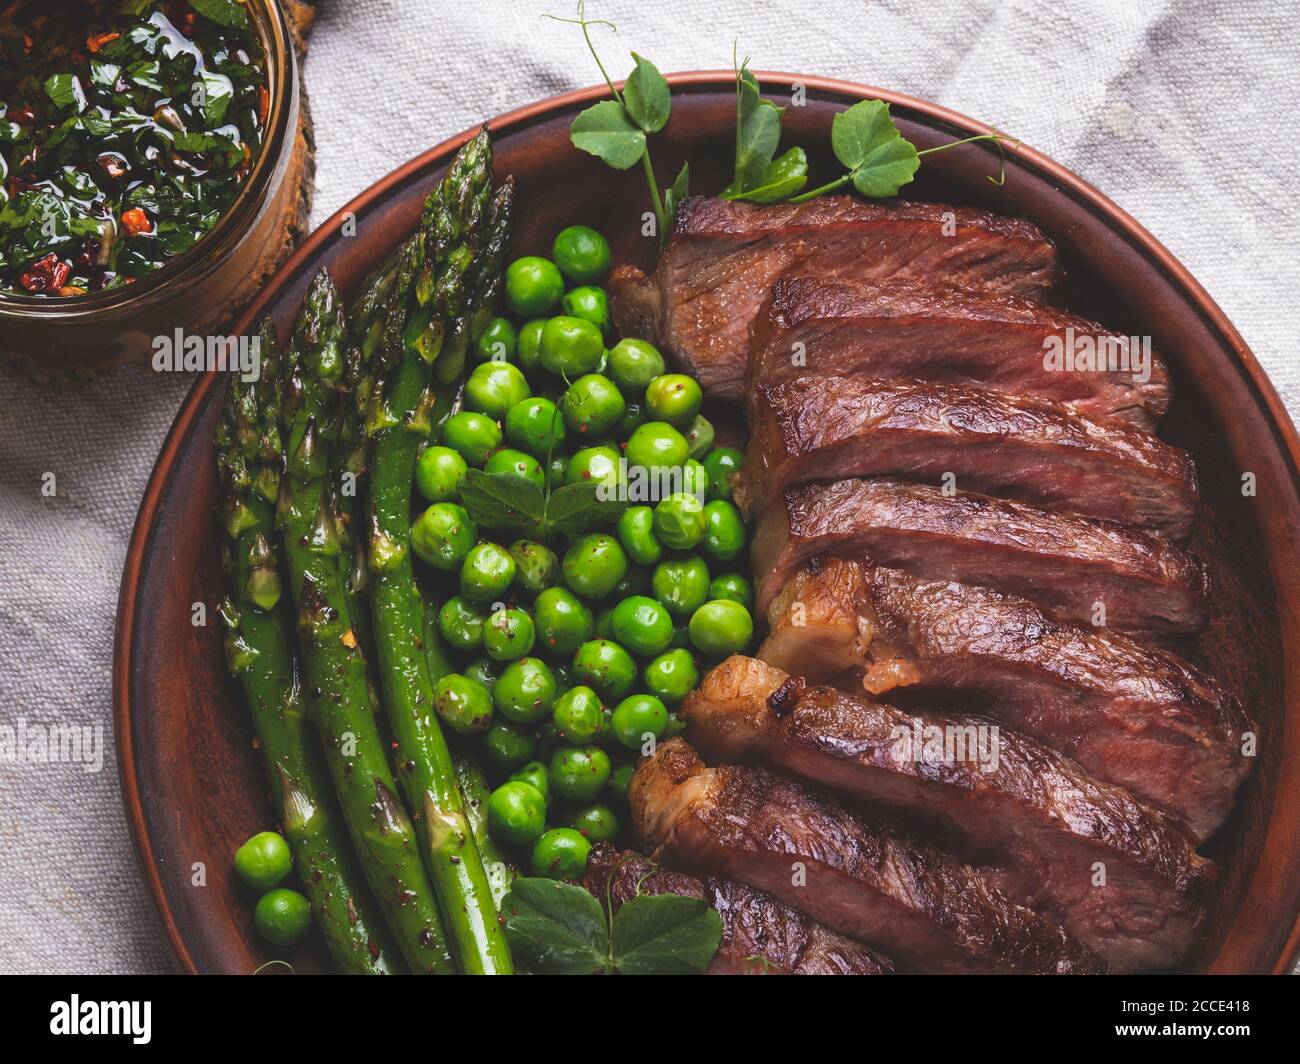 juicy roasted beef sliced steak, with green peas, roasted asparagus, on plate Stock Photo